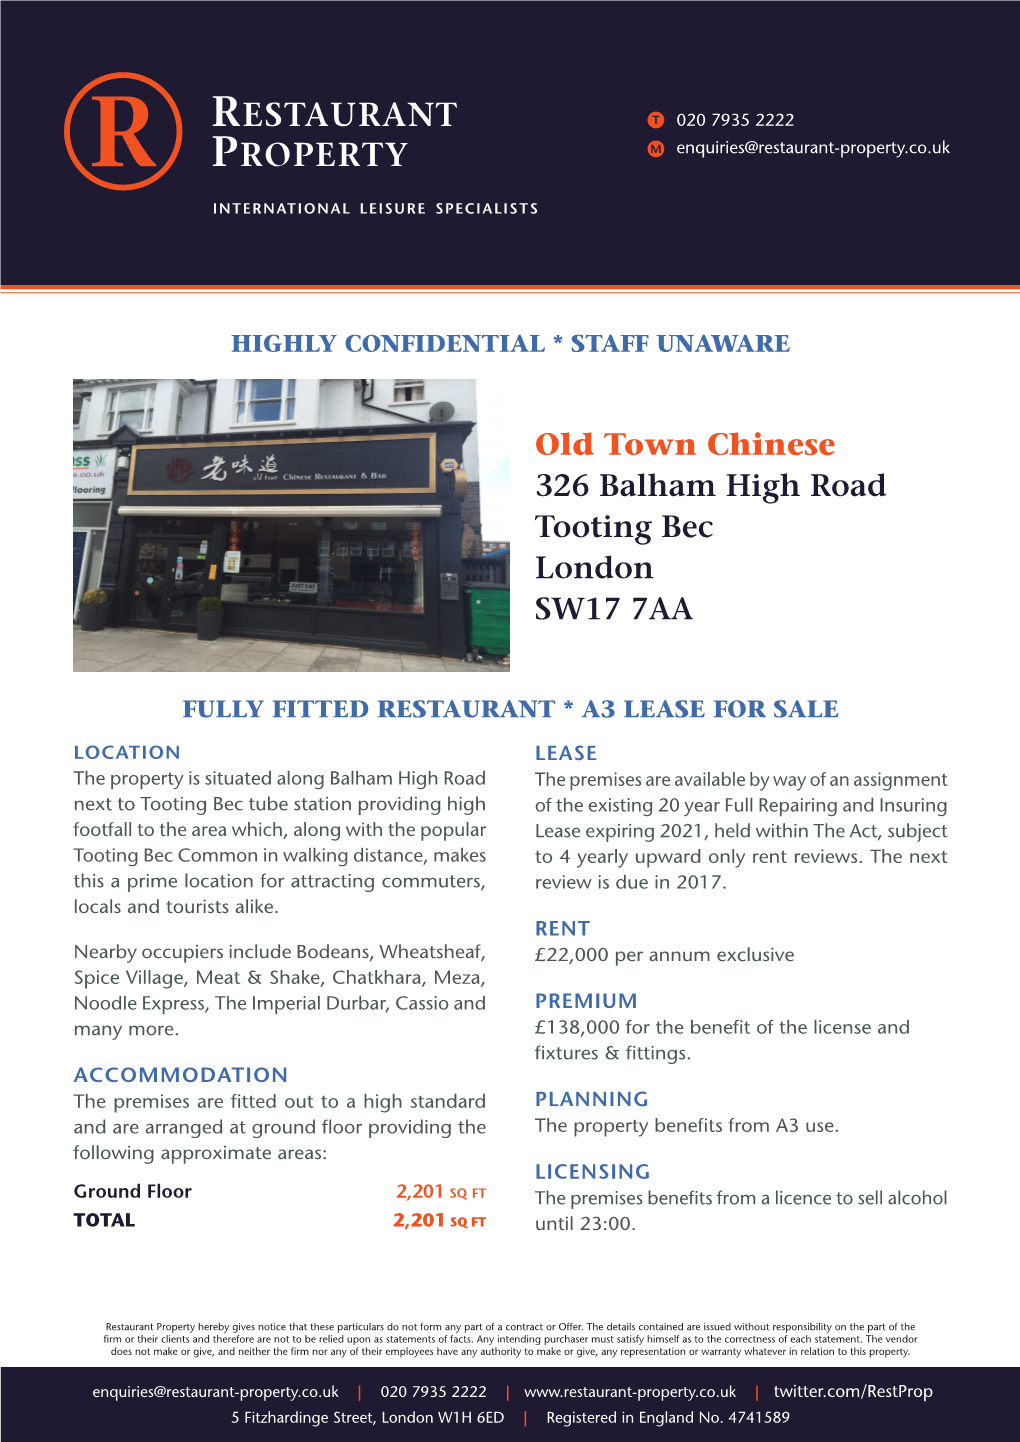 Old Town Chinese 326 Balham High Road Tooting Bec London SW17 7AA